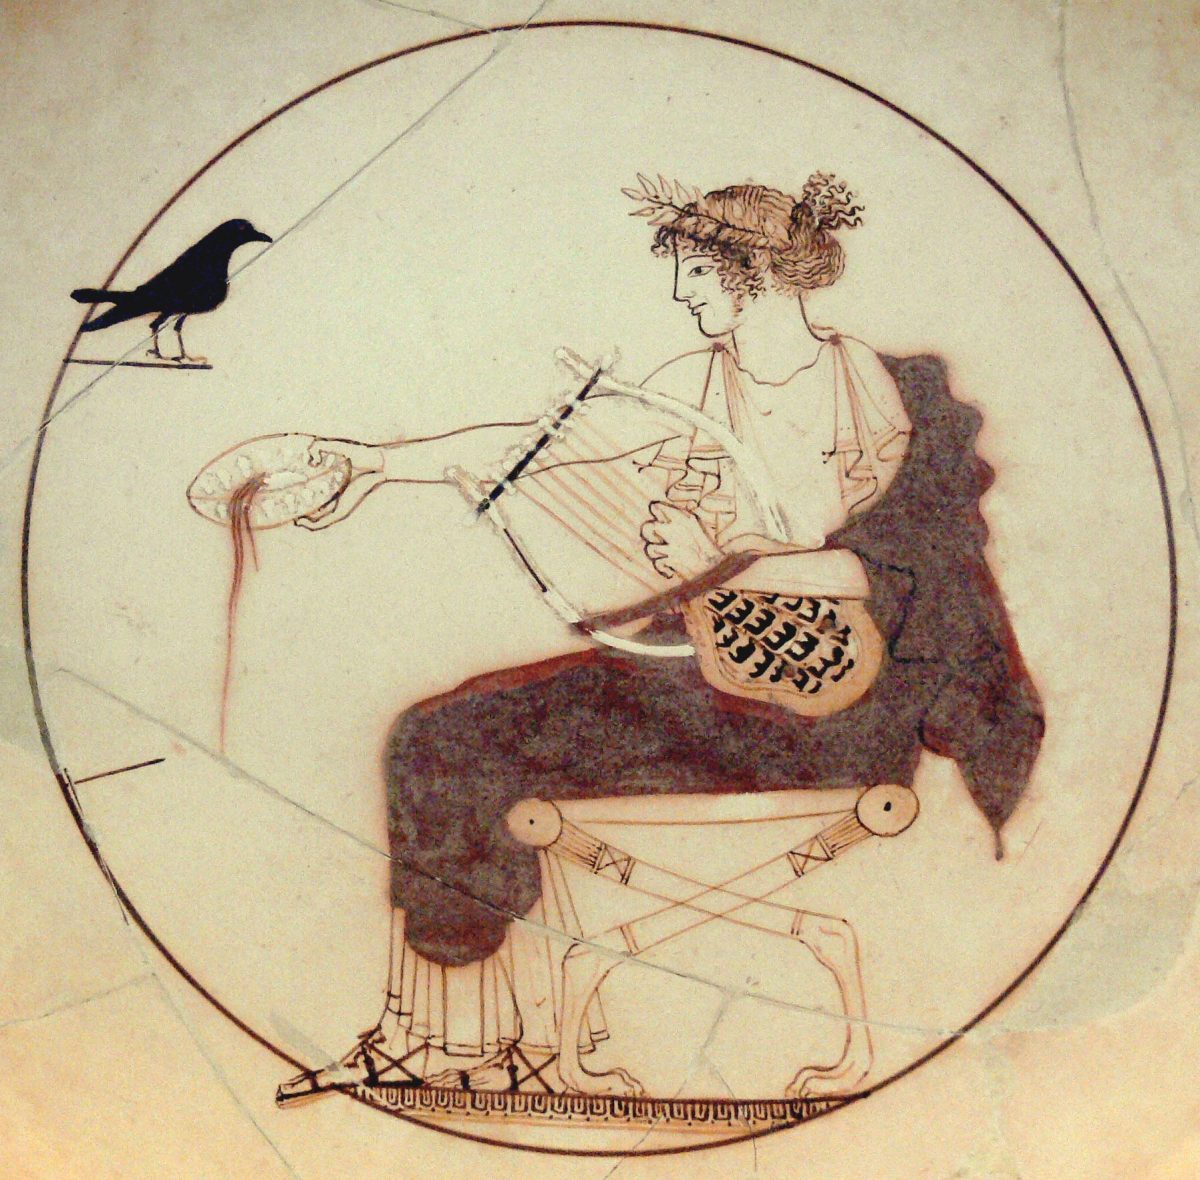 •	Apollo with the tortoise-shell lyre, on a fifth-century B.C. drinking cup or kylix. (CC BY-SA 2.0 de)